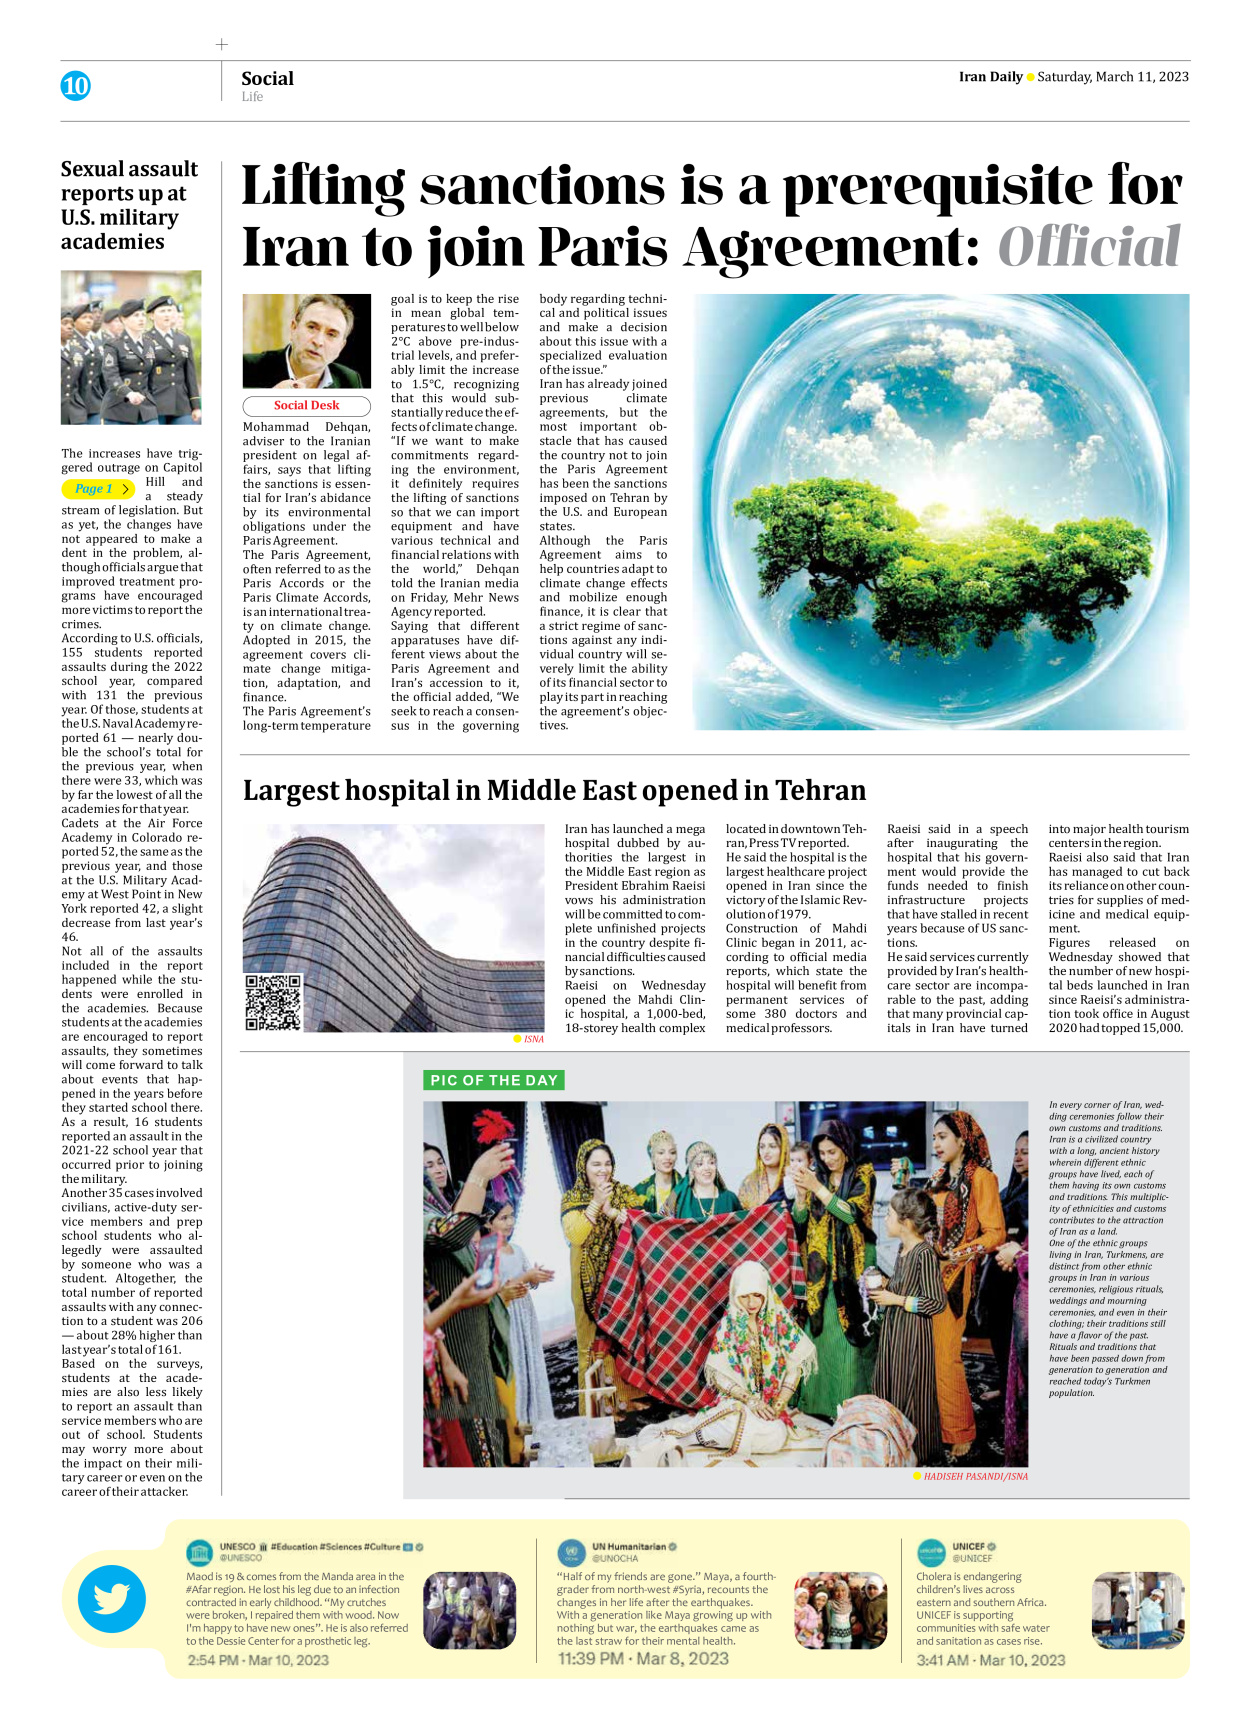 Iran Daily - Number Seven Thousand Two Hundred and Fifty Four - 11 March 2023 - Page 10